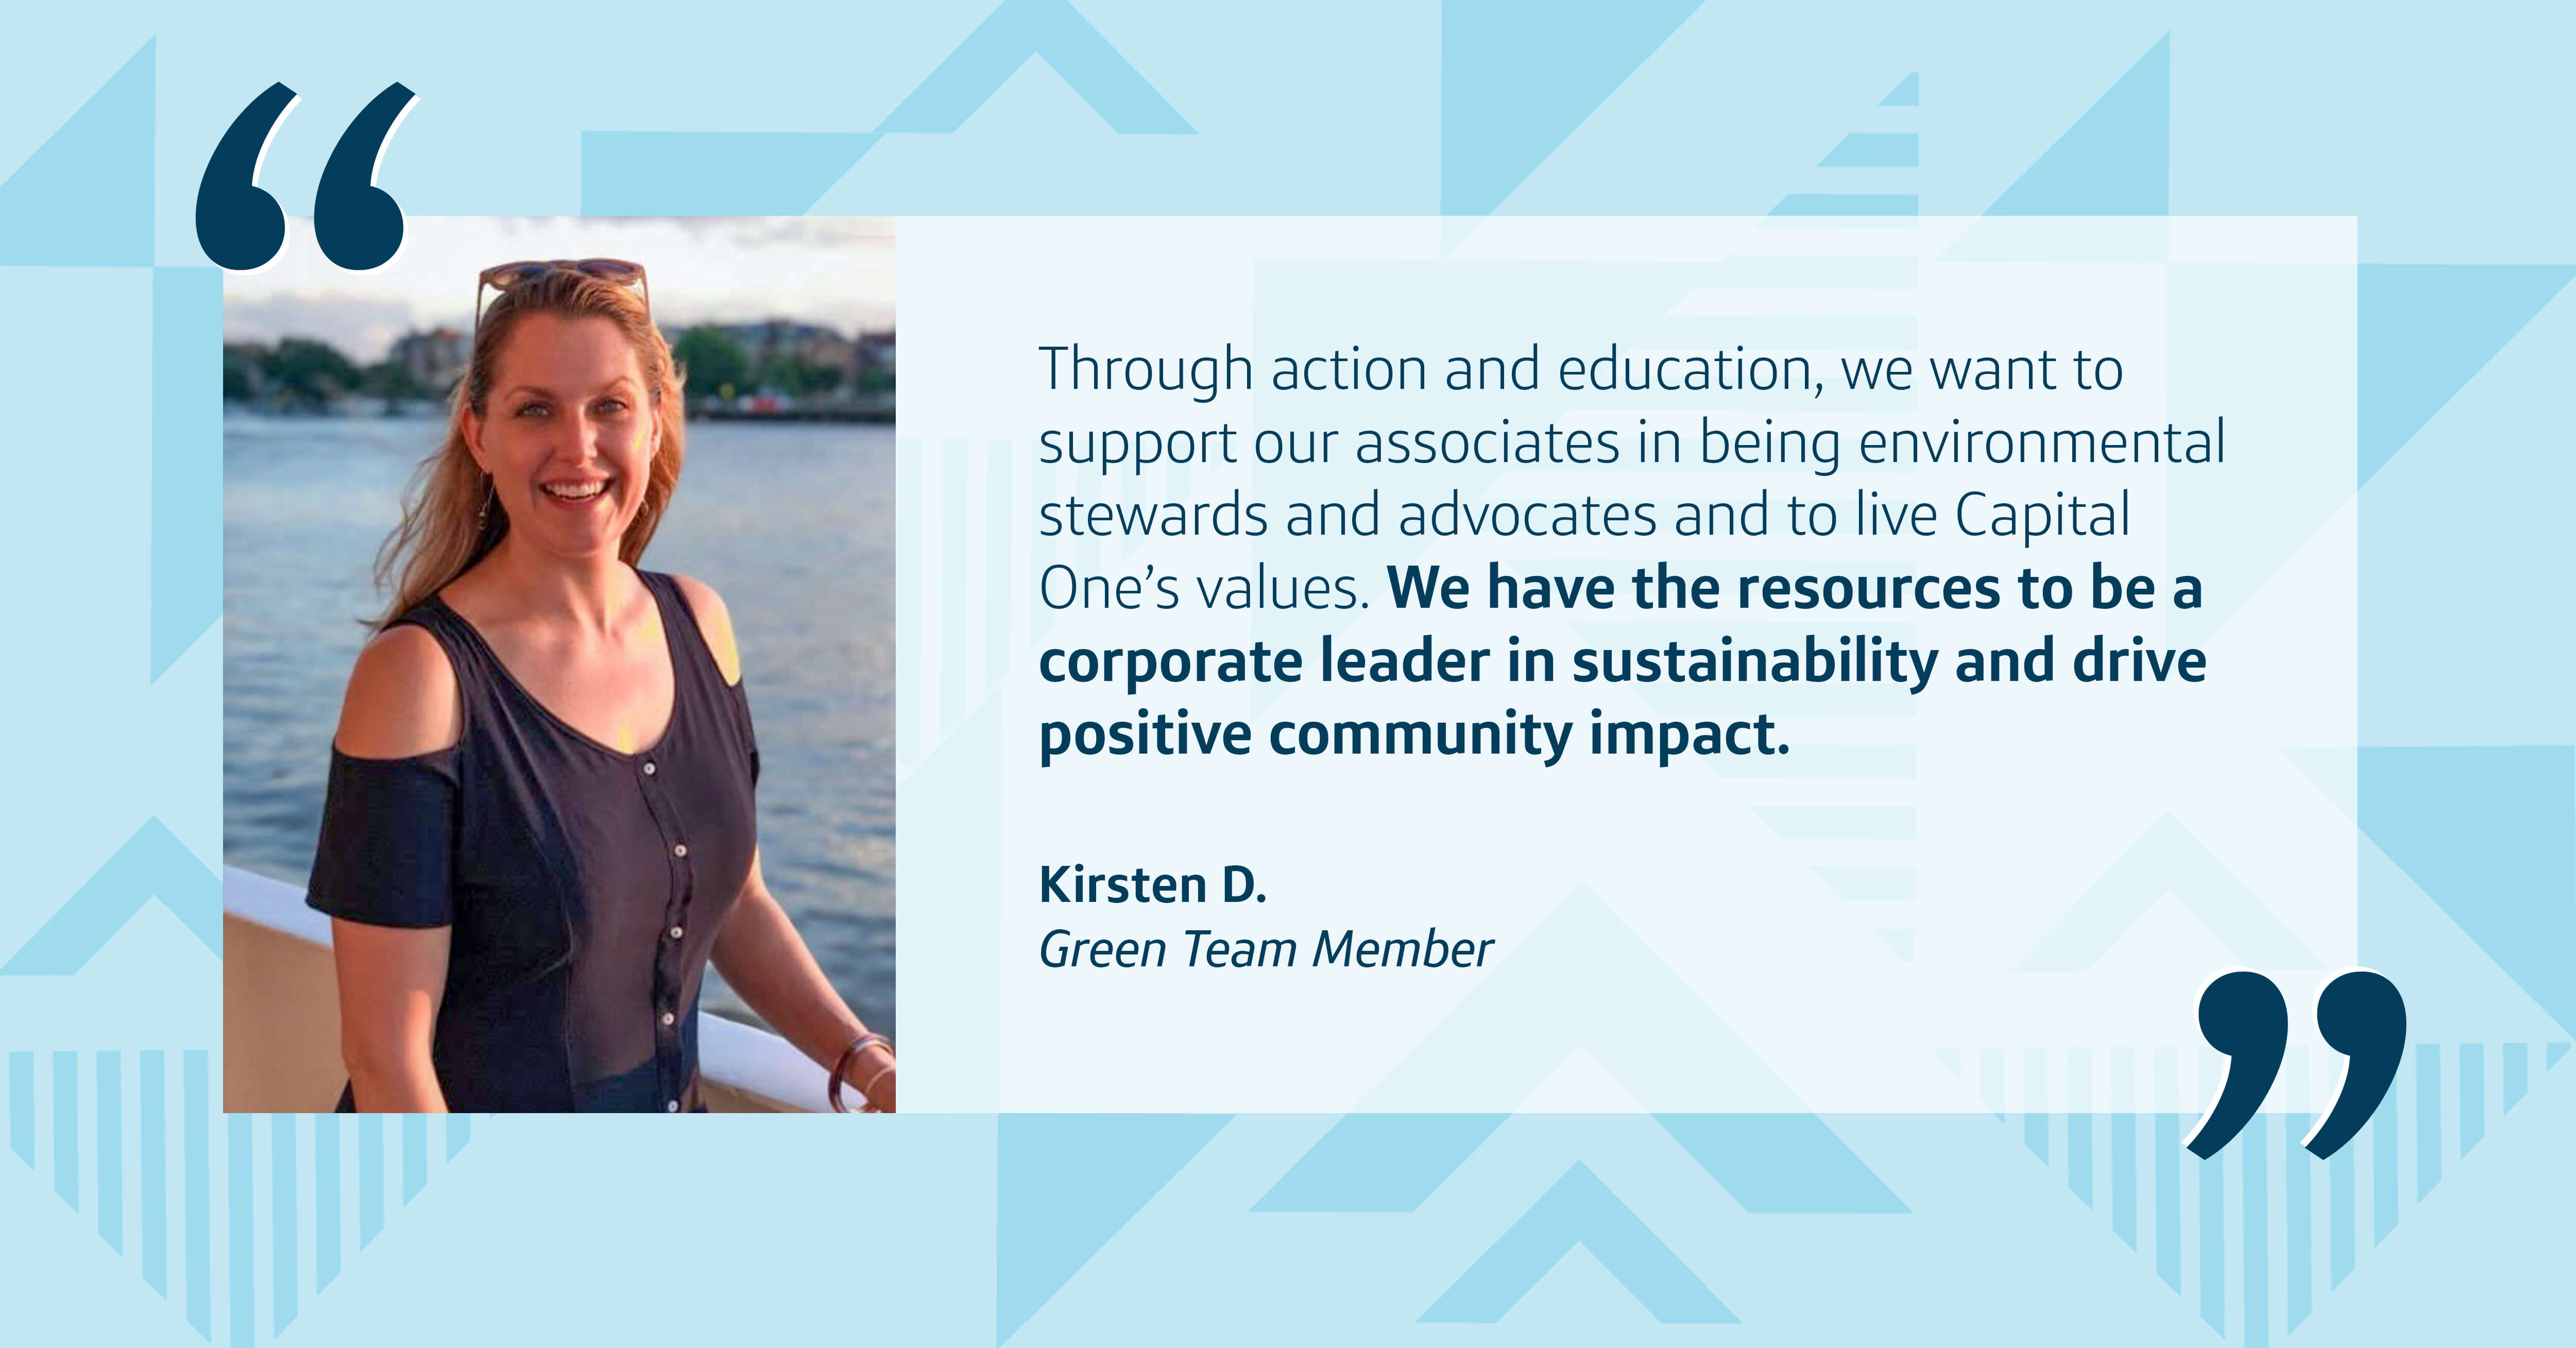 An image of Capital One Green Team Member Kristen D. next to a quote that says, “Through action and education, we want to support our associates in being environmental stewards and advocates and to live Capital One’s values. We have the resources to be a corporate leader in sustainability and drive positive community impact." – Kristen D., Green Team Member at Capital One, all  on top of a blue patterned background